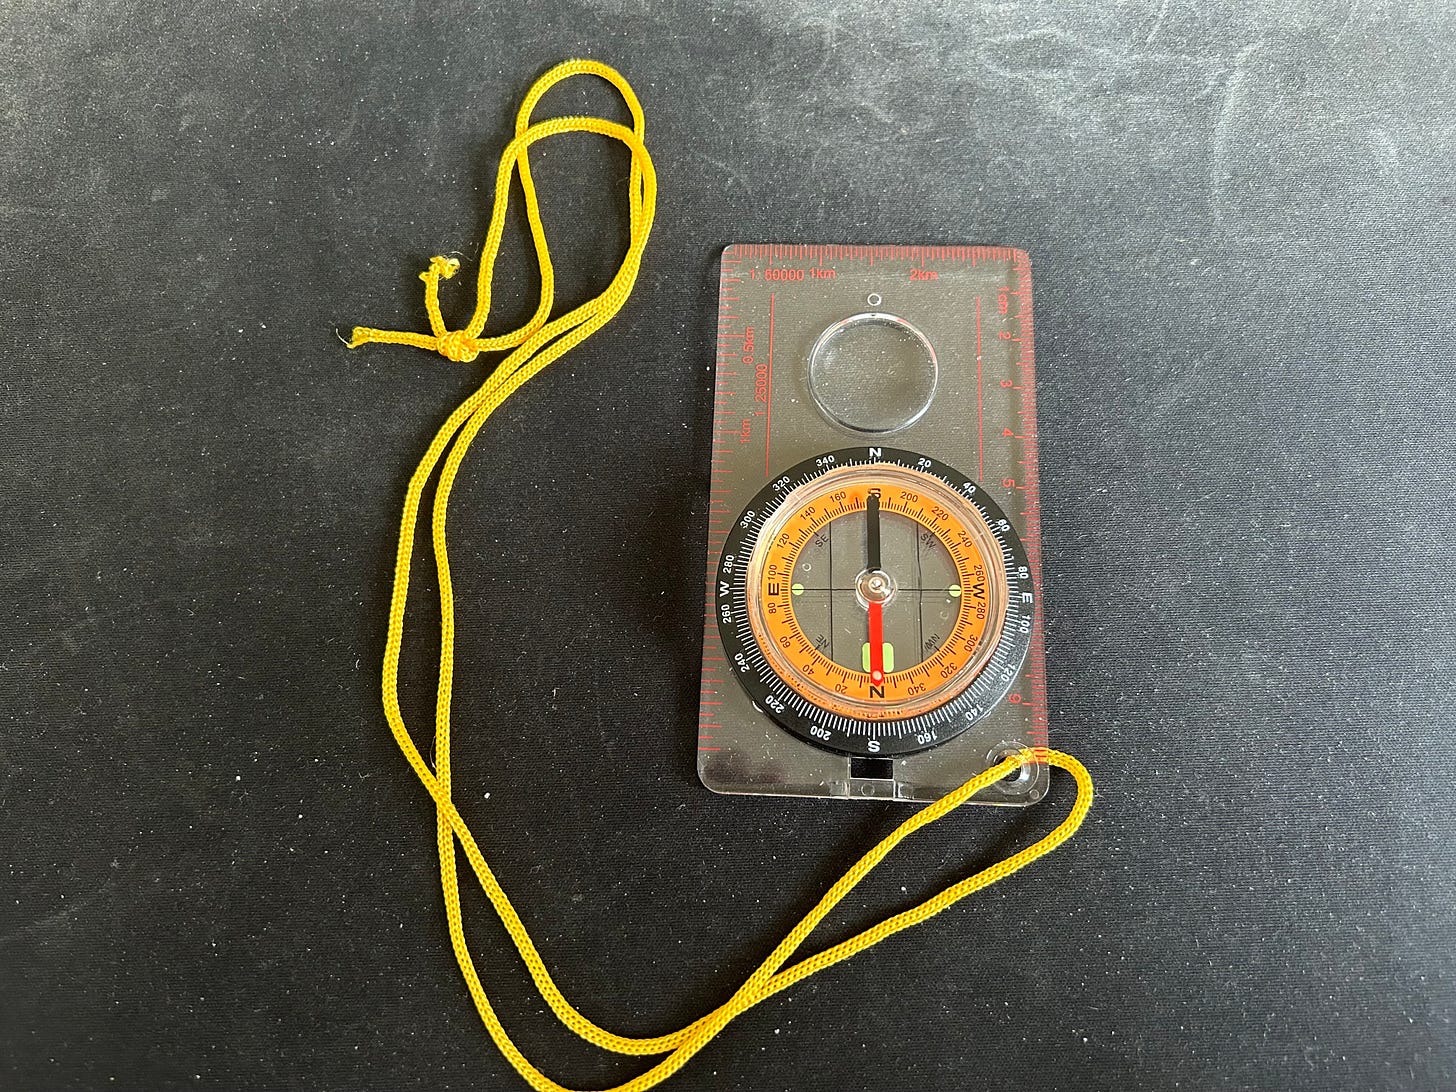 A baseplate magnetic compass used by hikers to get the correct directions from a map.